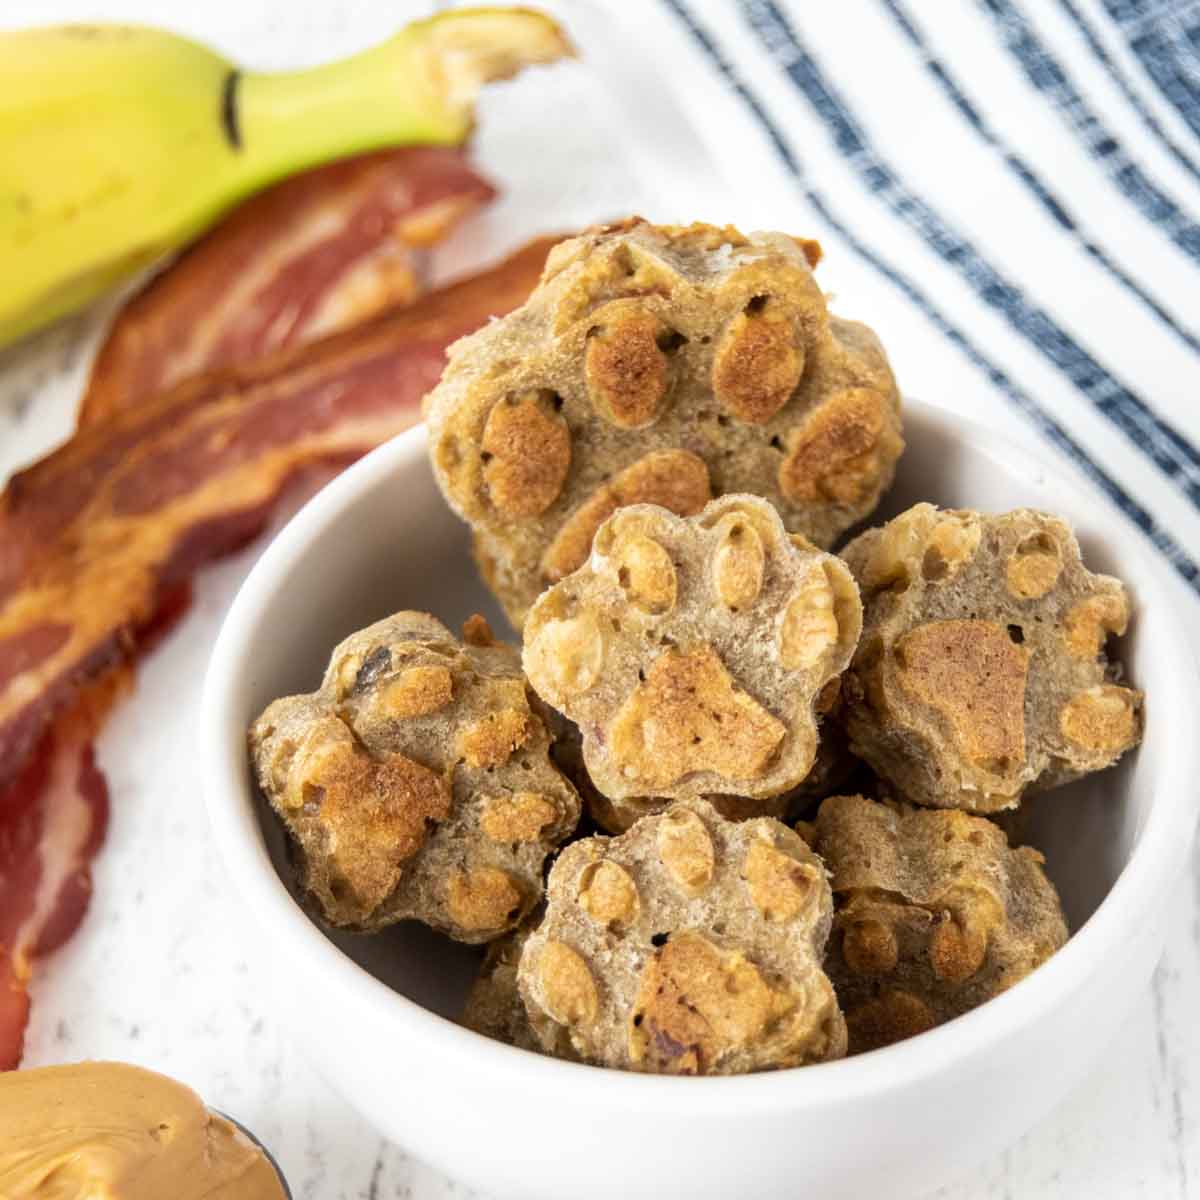 Wholesome Delights for Your Canine Companion: 3 Homemade Dog Treat Recipes